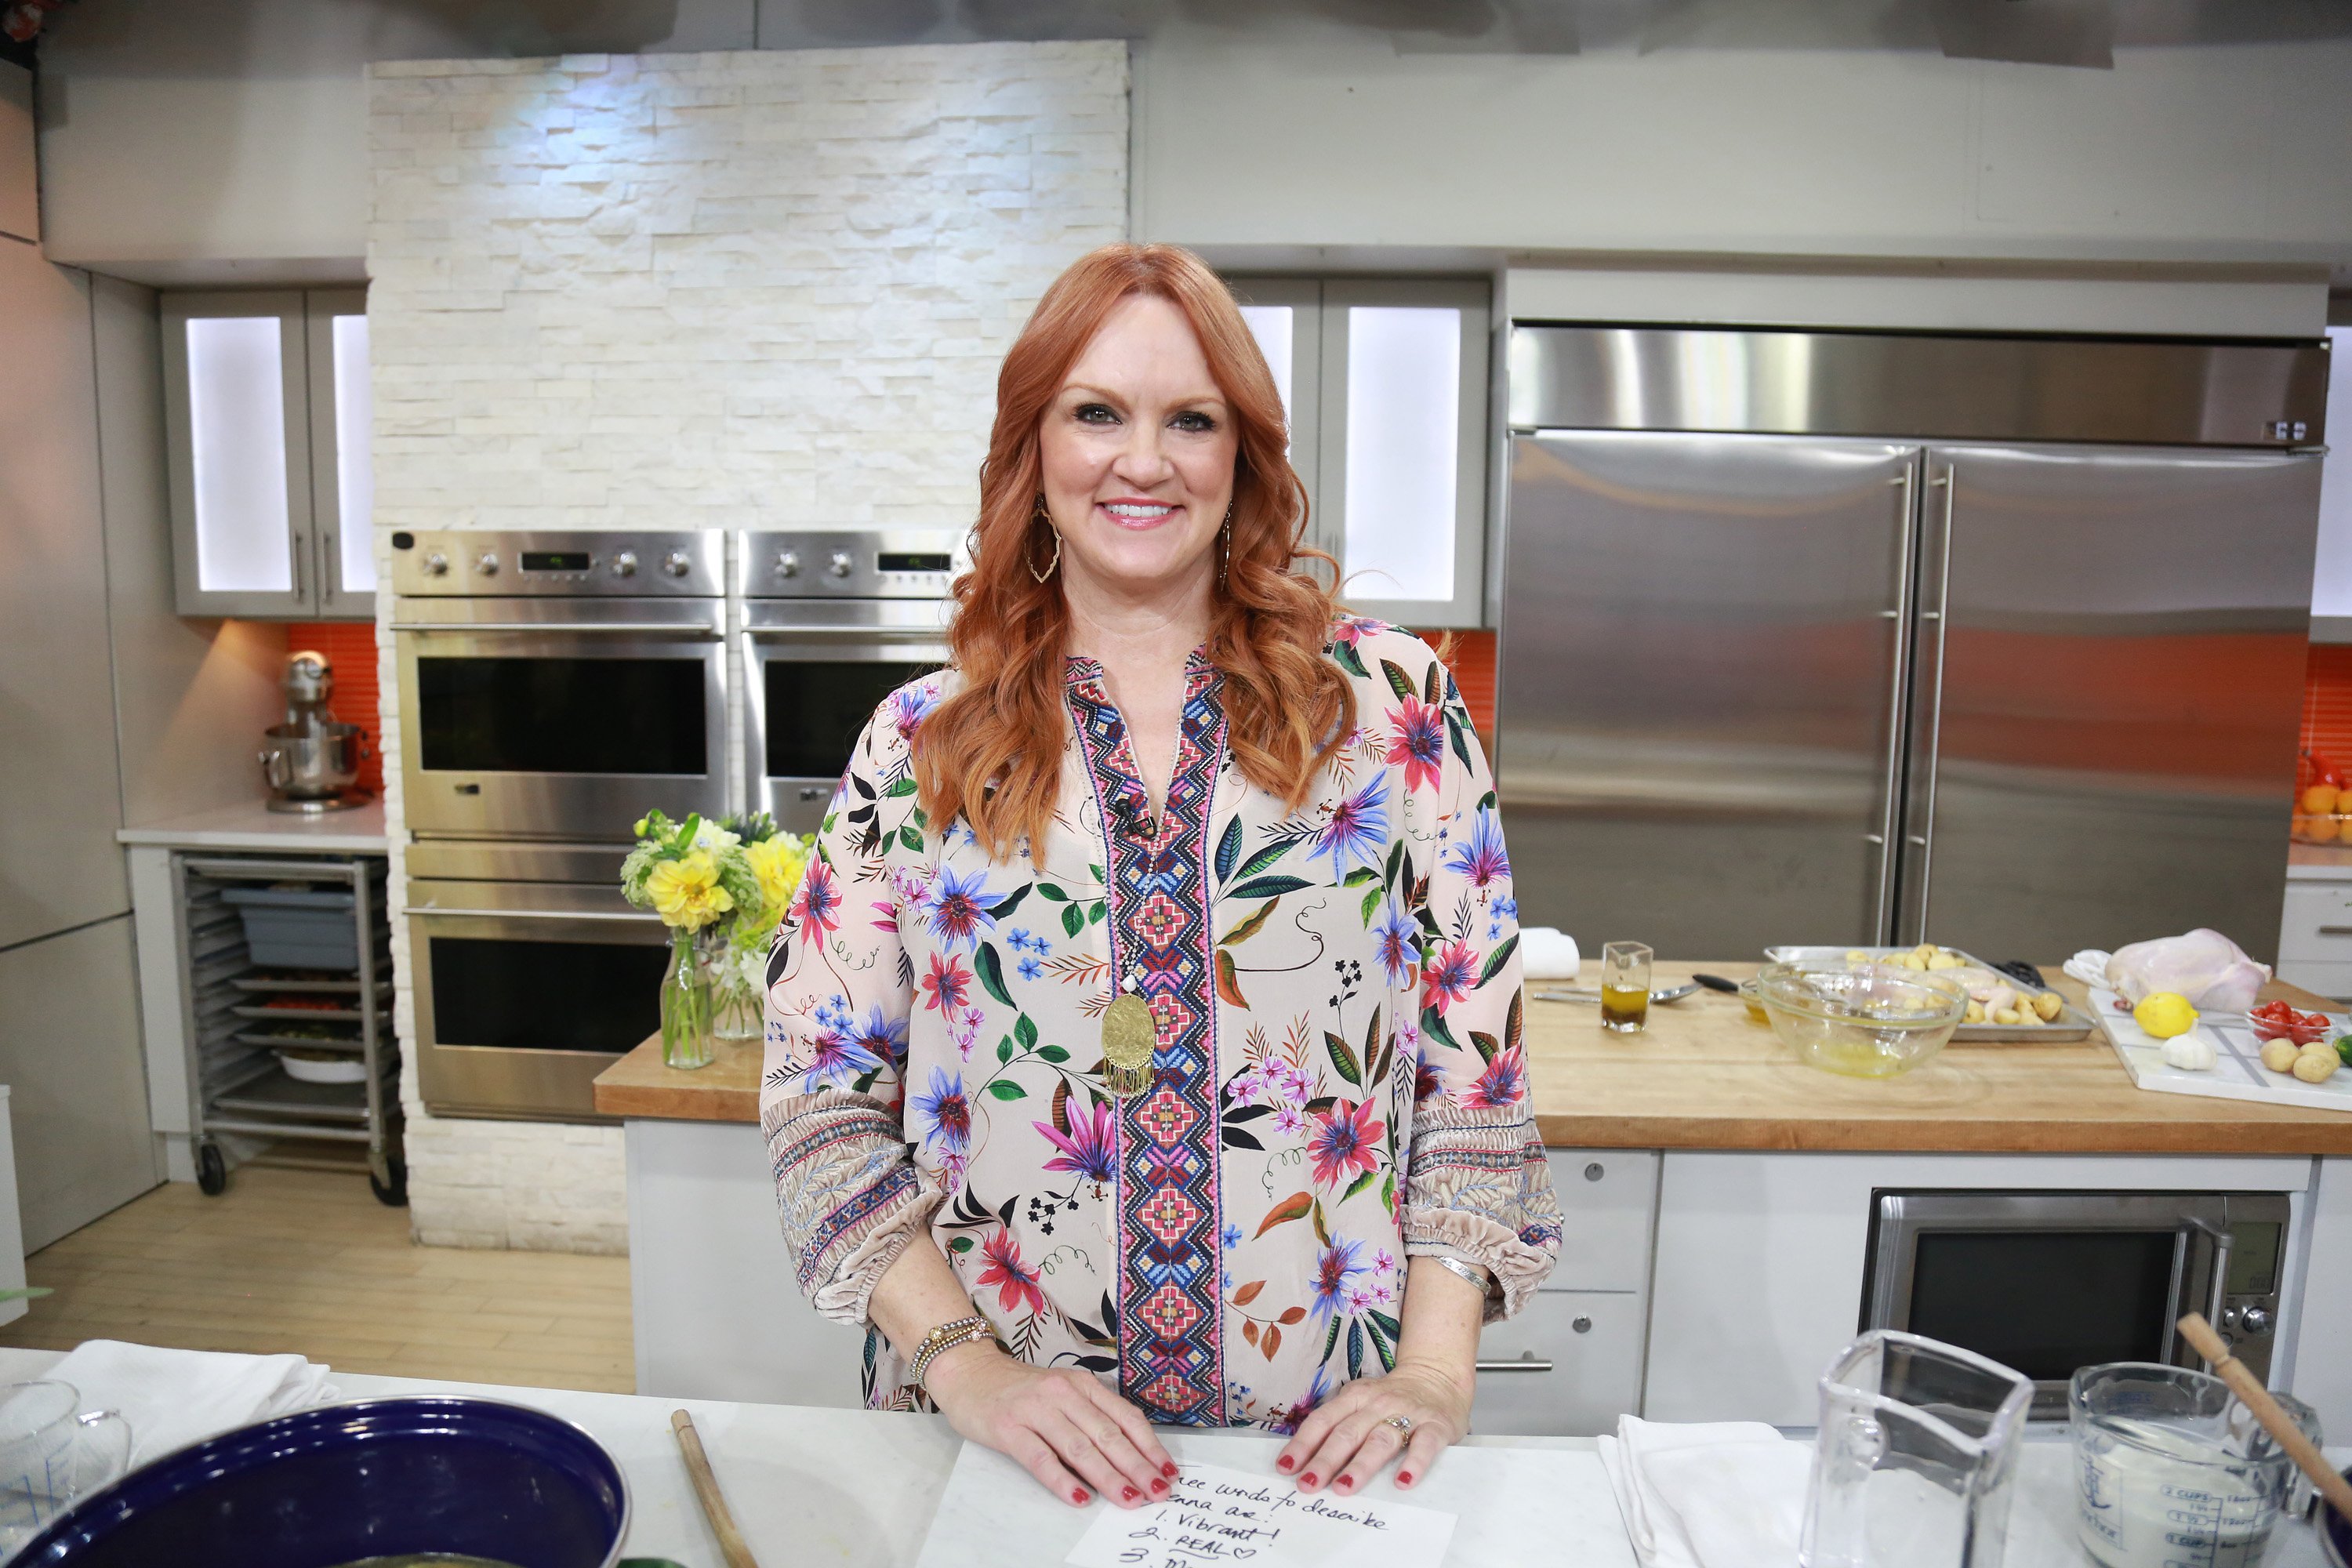 Ree Drummond on the 'Today' show | Tyler Essary/NBC/NBCU Photo Bank via Getty Images